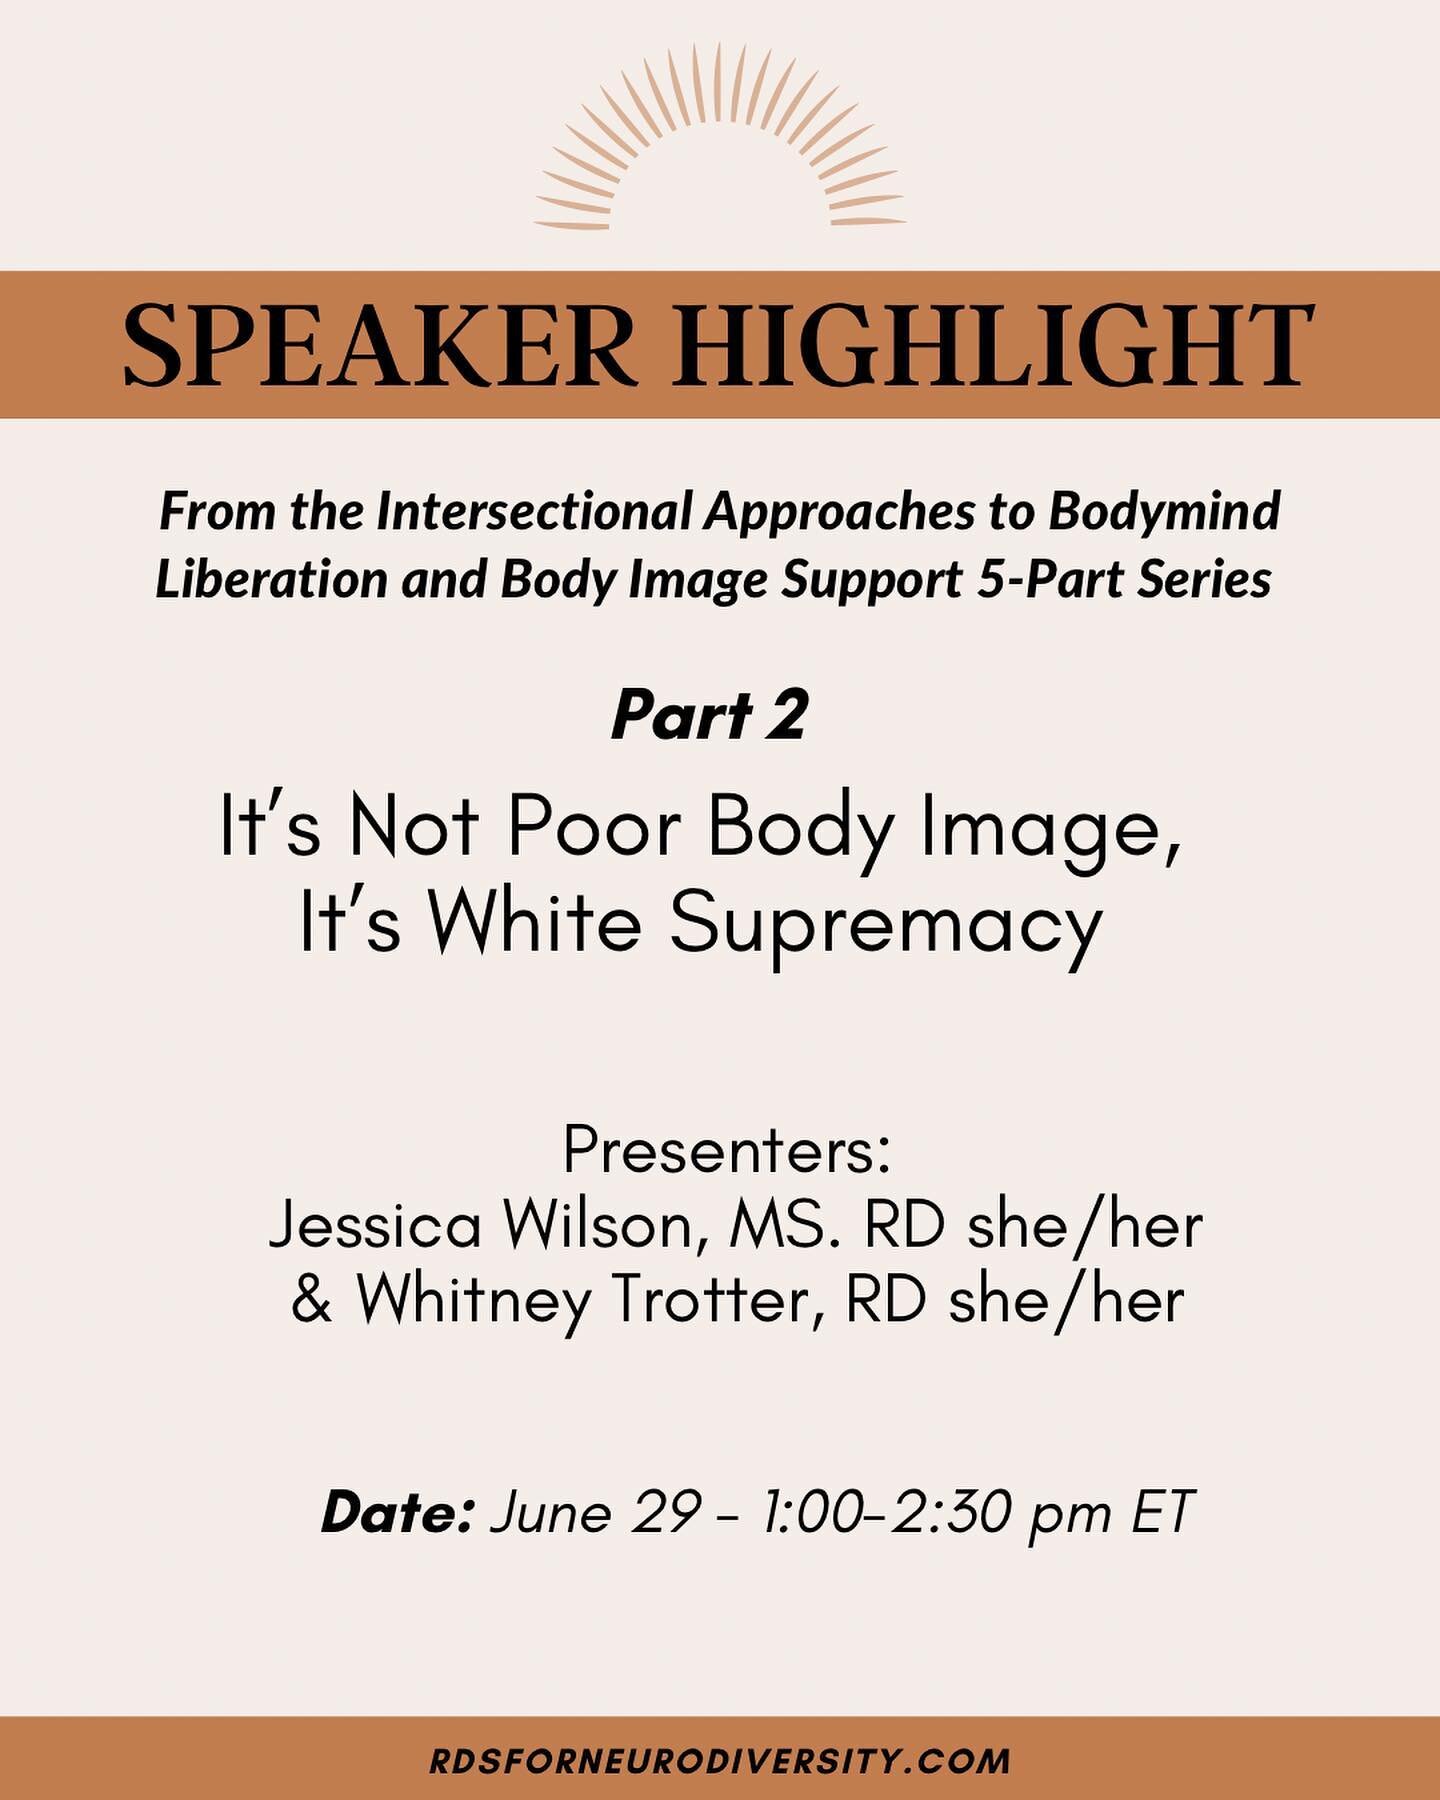 This talk is going to be fantastic, we are really excited to learn from Jessica and Whitney! ⁣
⁣
Registration link in bio! ⁣
⁣
𝗝𝗲𝘀𝘀𝗶𝗰𝗮 𝗪𝗶𝗹𝘀𝗼𝗻 (she/her) is a clinical dietitian, consultant and author, whose experiences navigating the diet